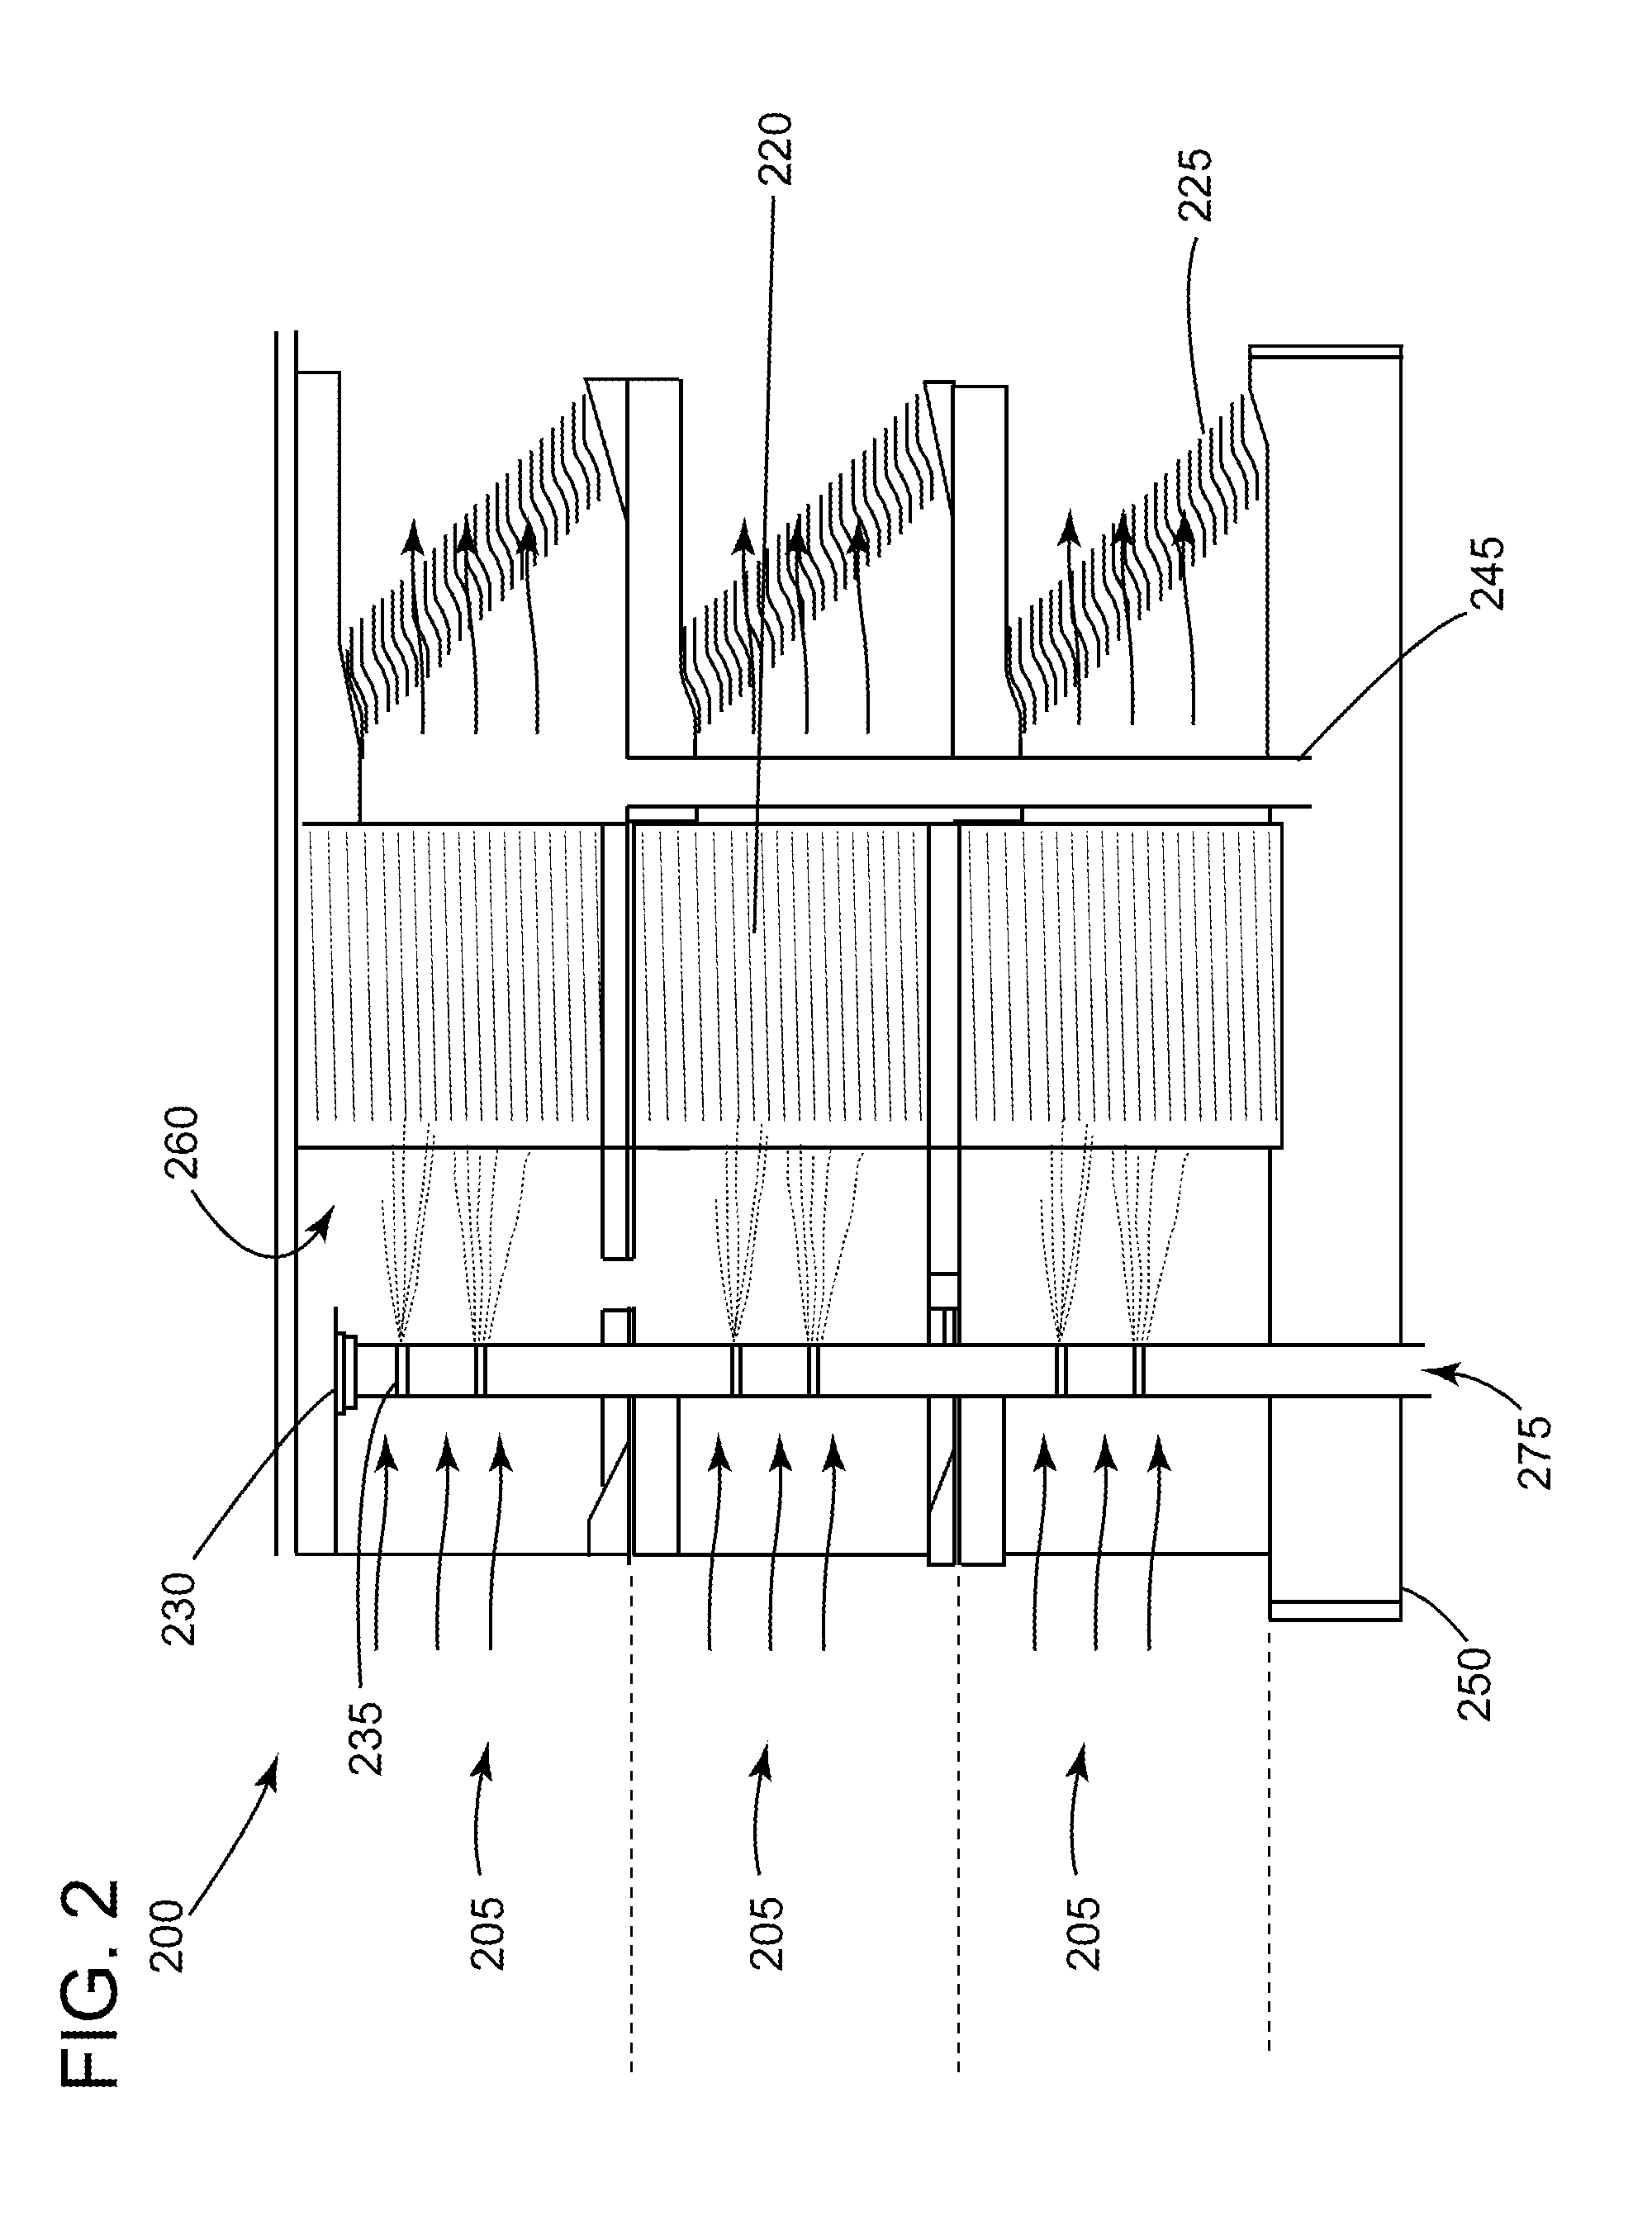 System for conditioning the airflow entering a turbomachine